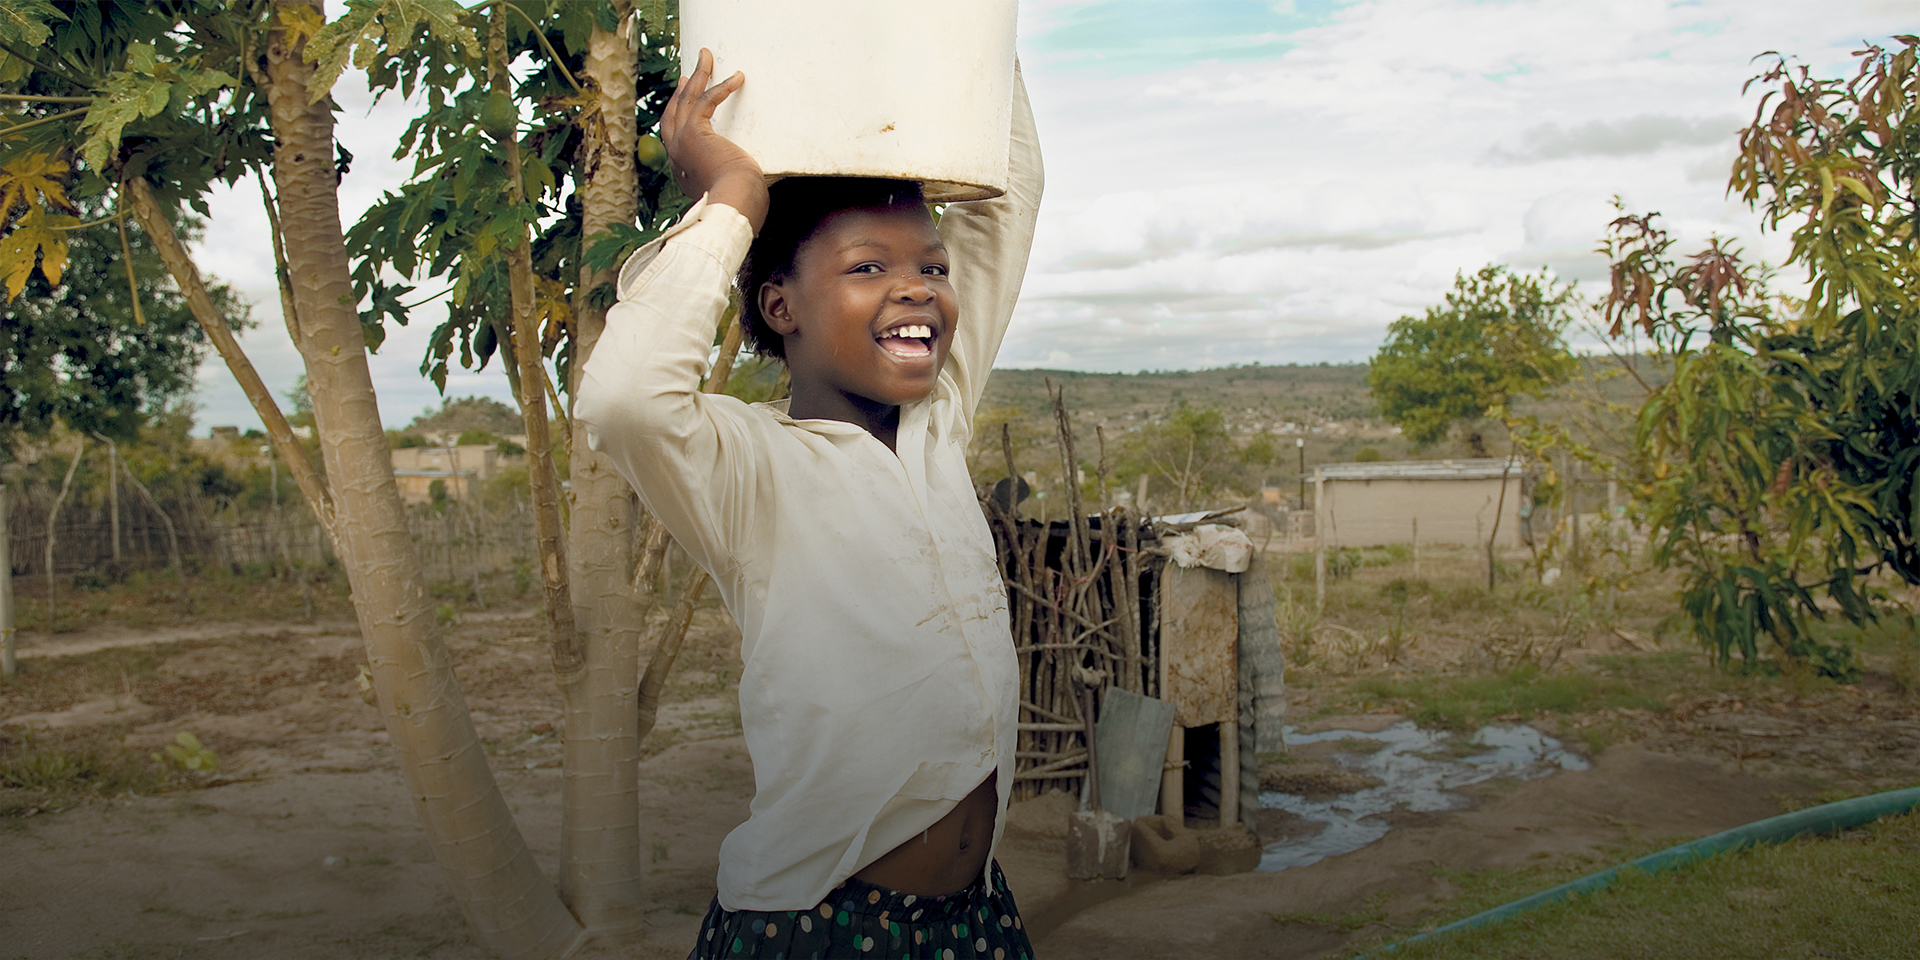 Smiling girl in South Africa carrying water